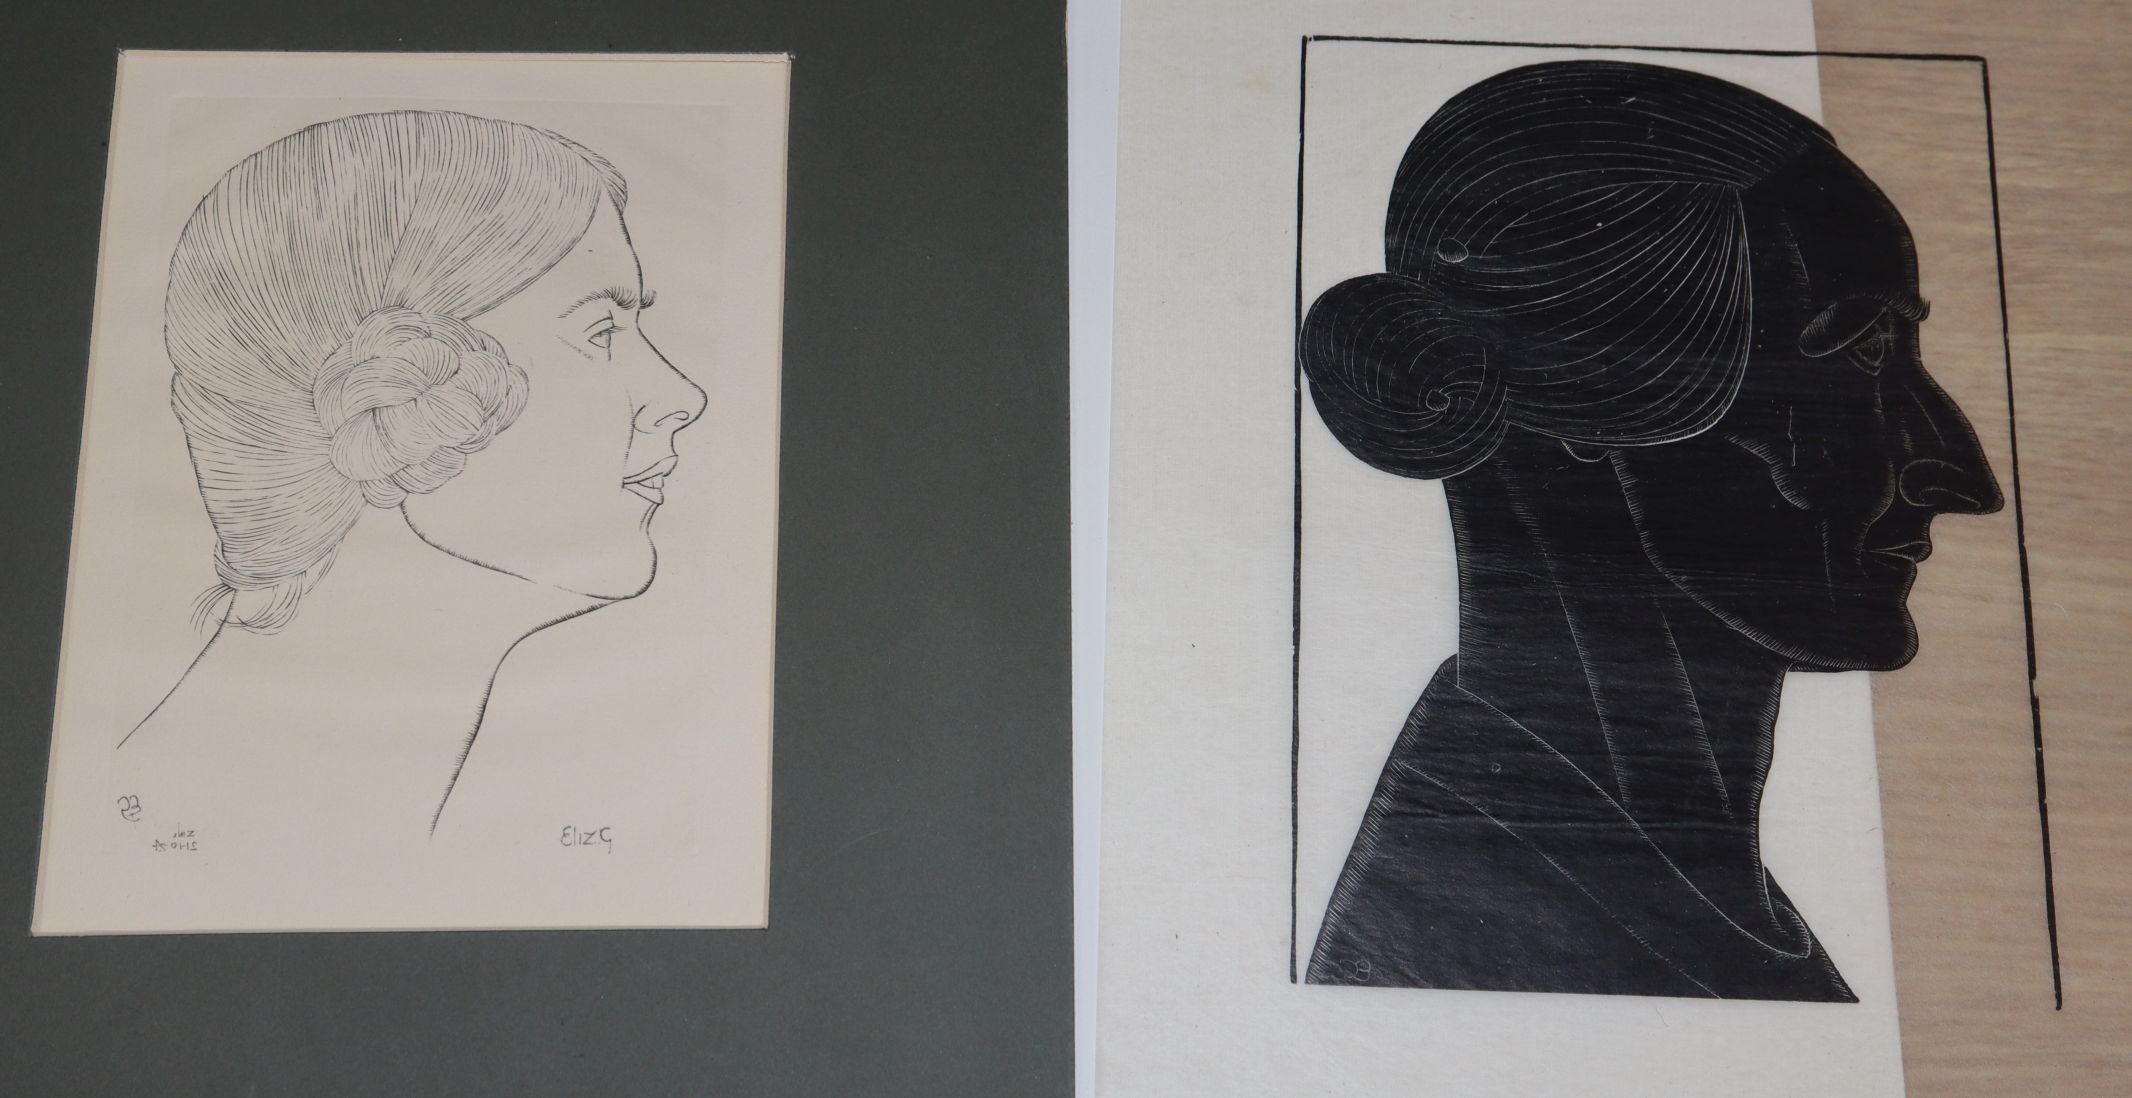 Eric Gill, engraving on ink, ElizG, wood engraving on tissue paper, Silhouette of a woman, largest